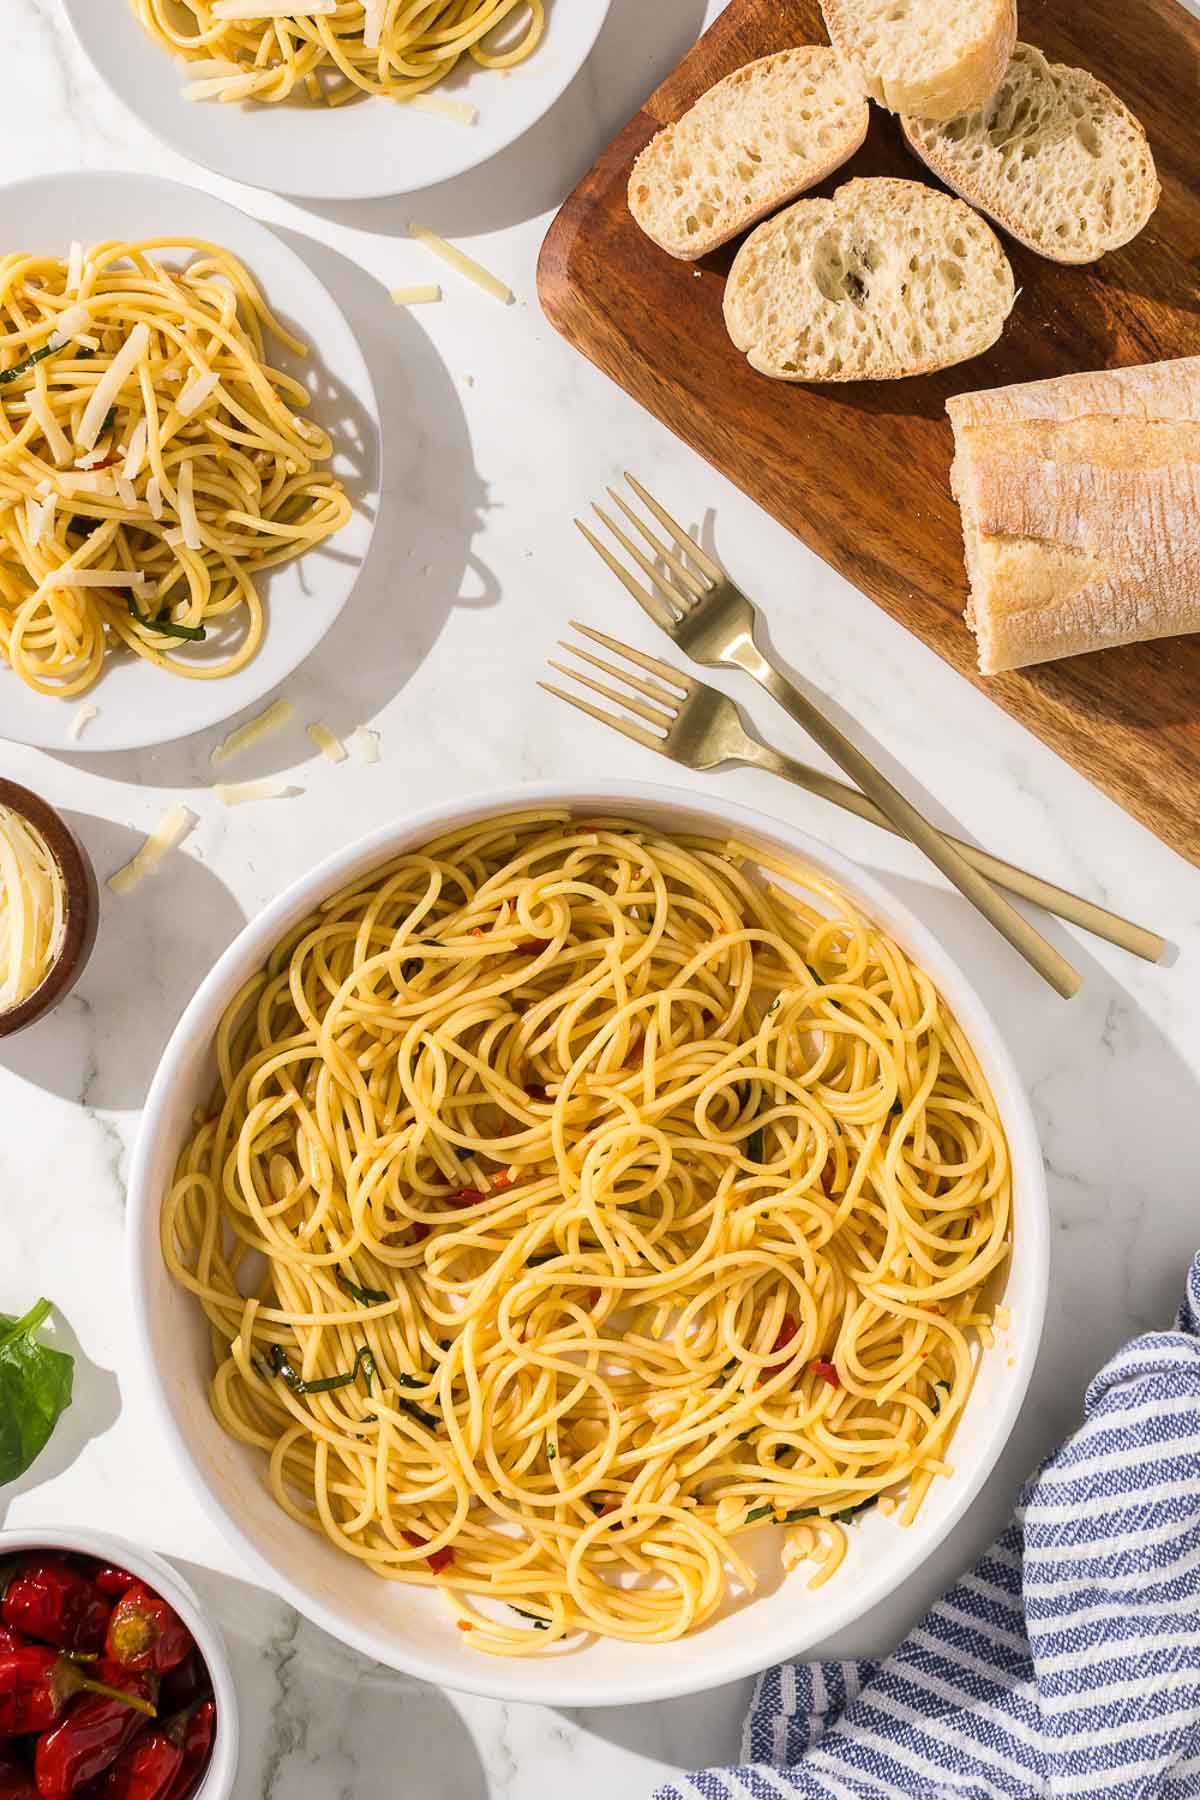 A plate of spaghetti and bread on a marble table.